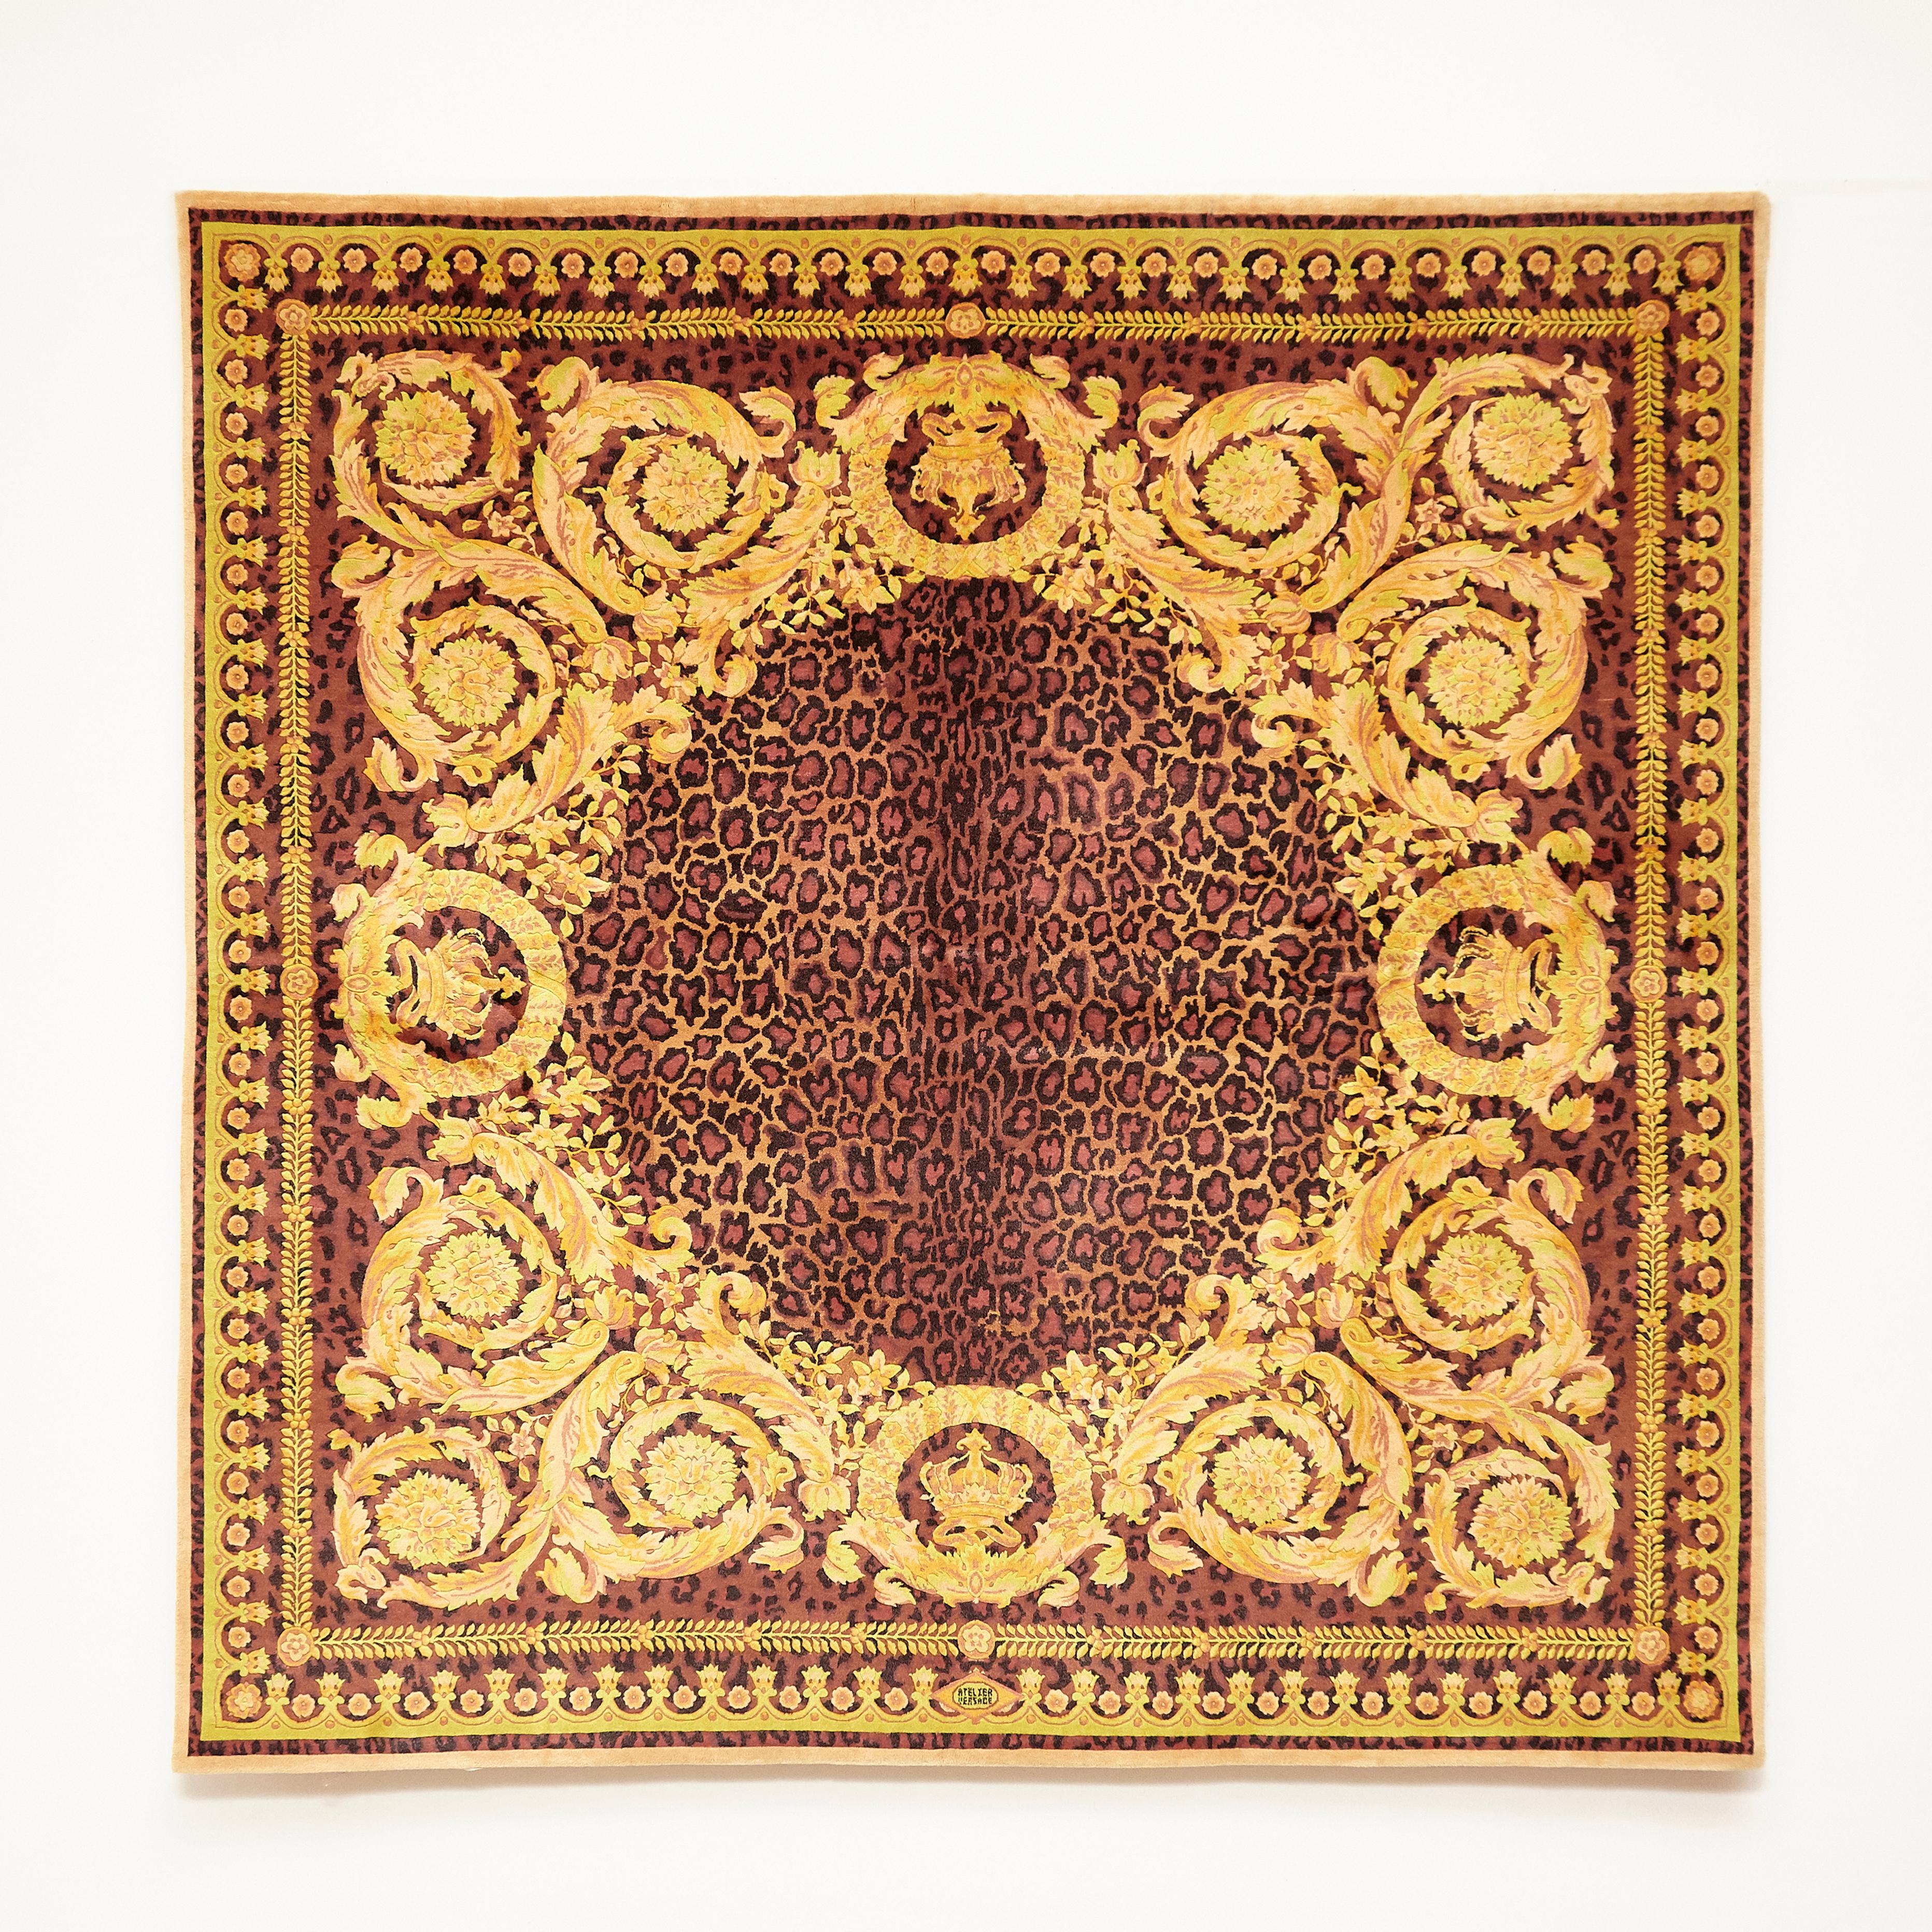 Rug made in China designed and manufactured by Atelier Versace

Wild Barocco

Measures: 220x220 

In good original condition, with minor wear consistent with age and use

A vintage Gianni Versace home signature wool rug. Baroque gold tones,